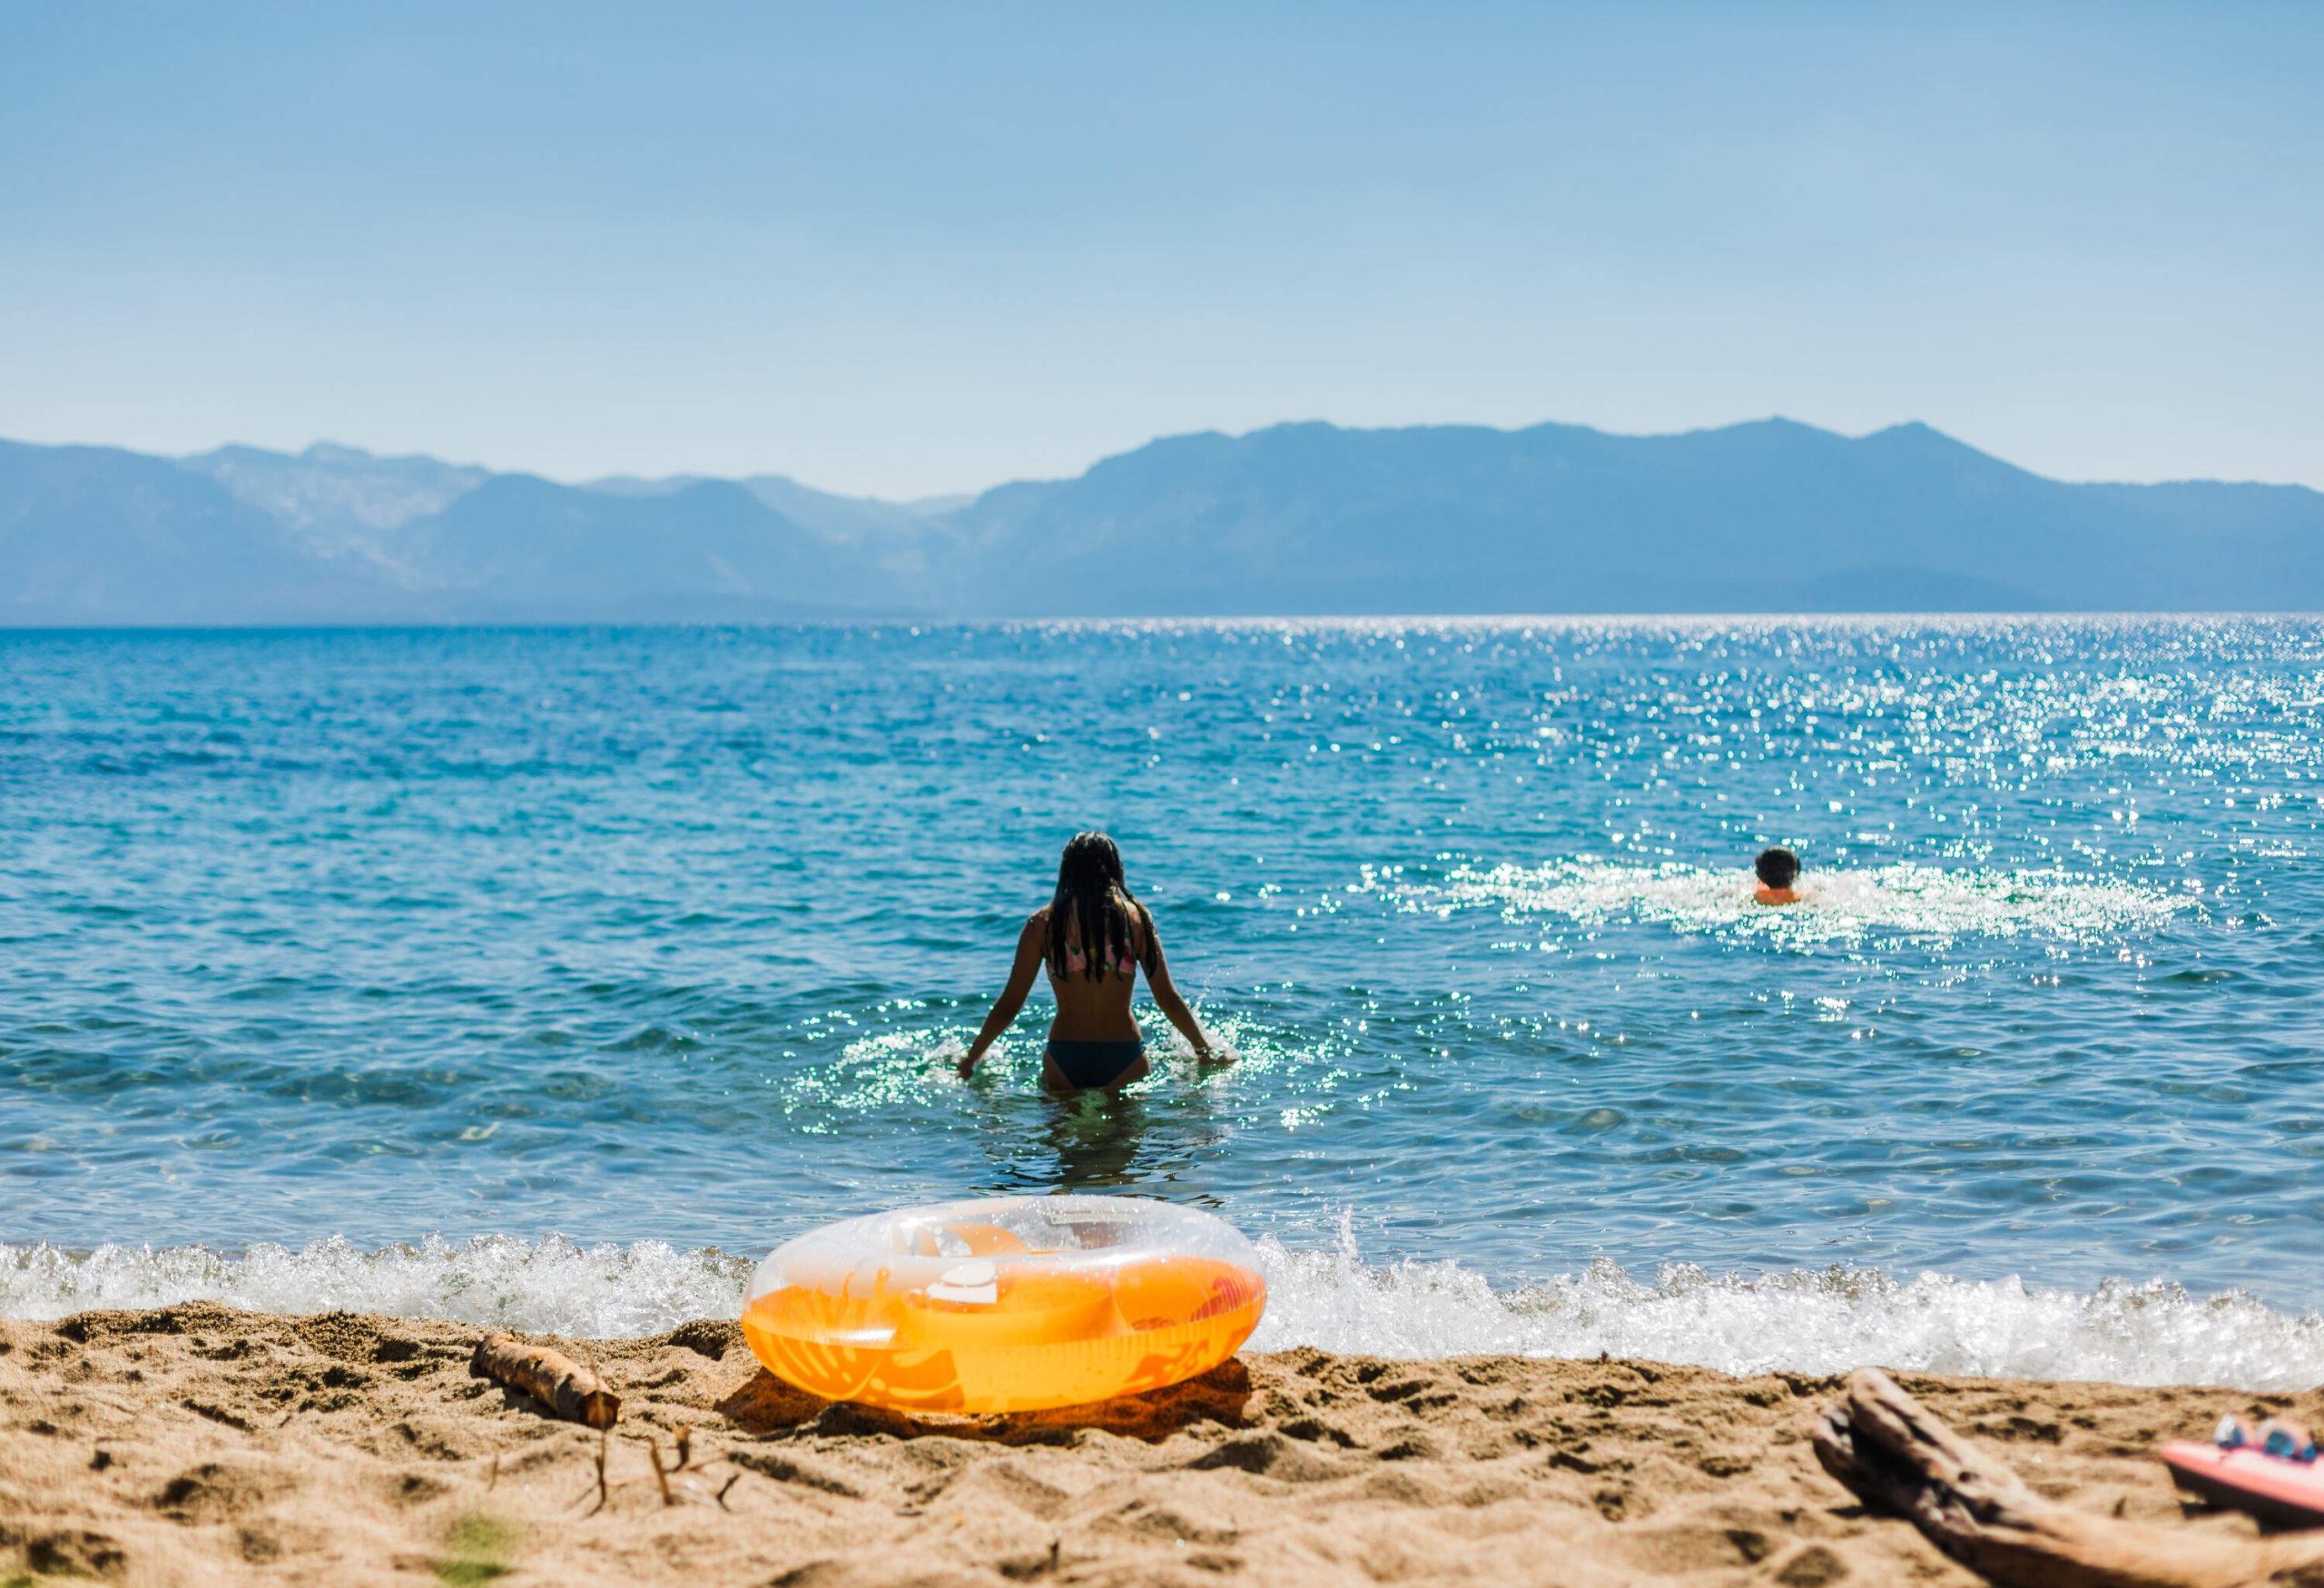 dest_usa_lake-tahoe_theme_woman_swimming_lake_mountain_inflatable_gettyimages-1277366585